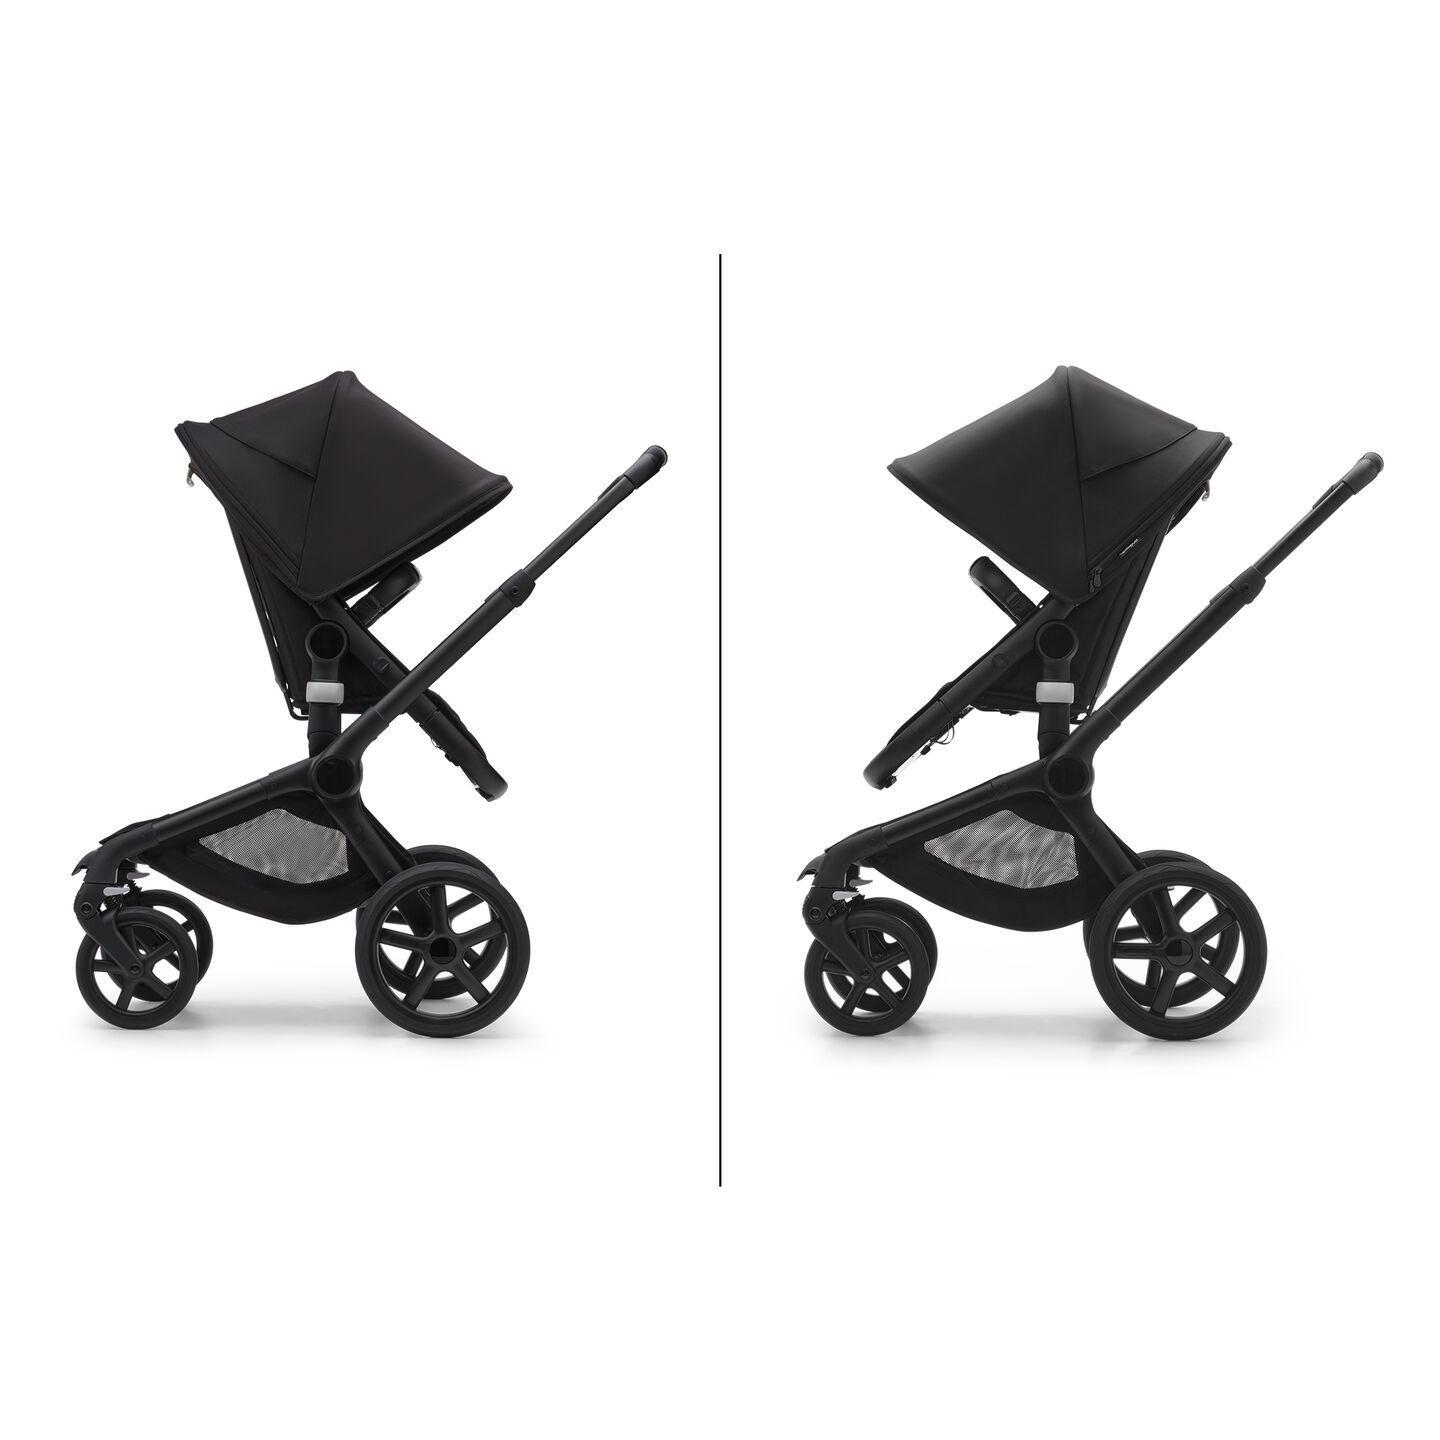 Bugaboo Fox 5 bassinet and seat stroller Sunrise red sun canopy, grey  mélange fabrics, black chassis